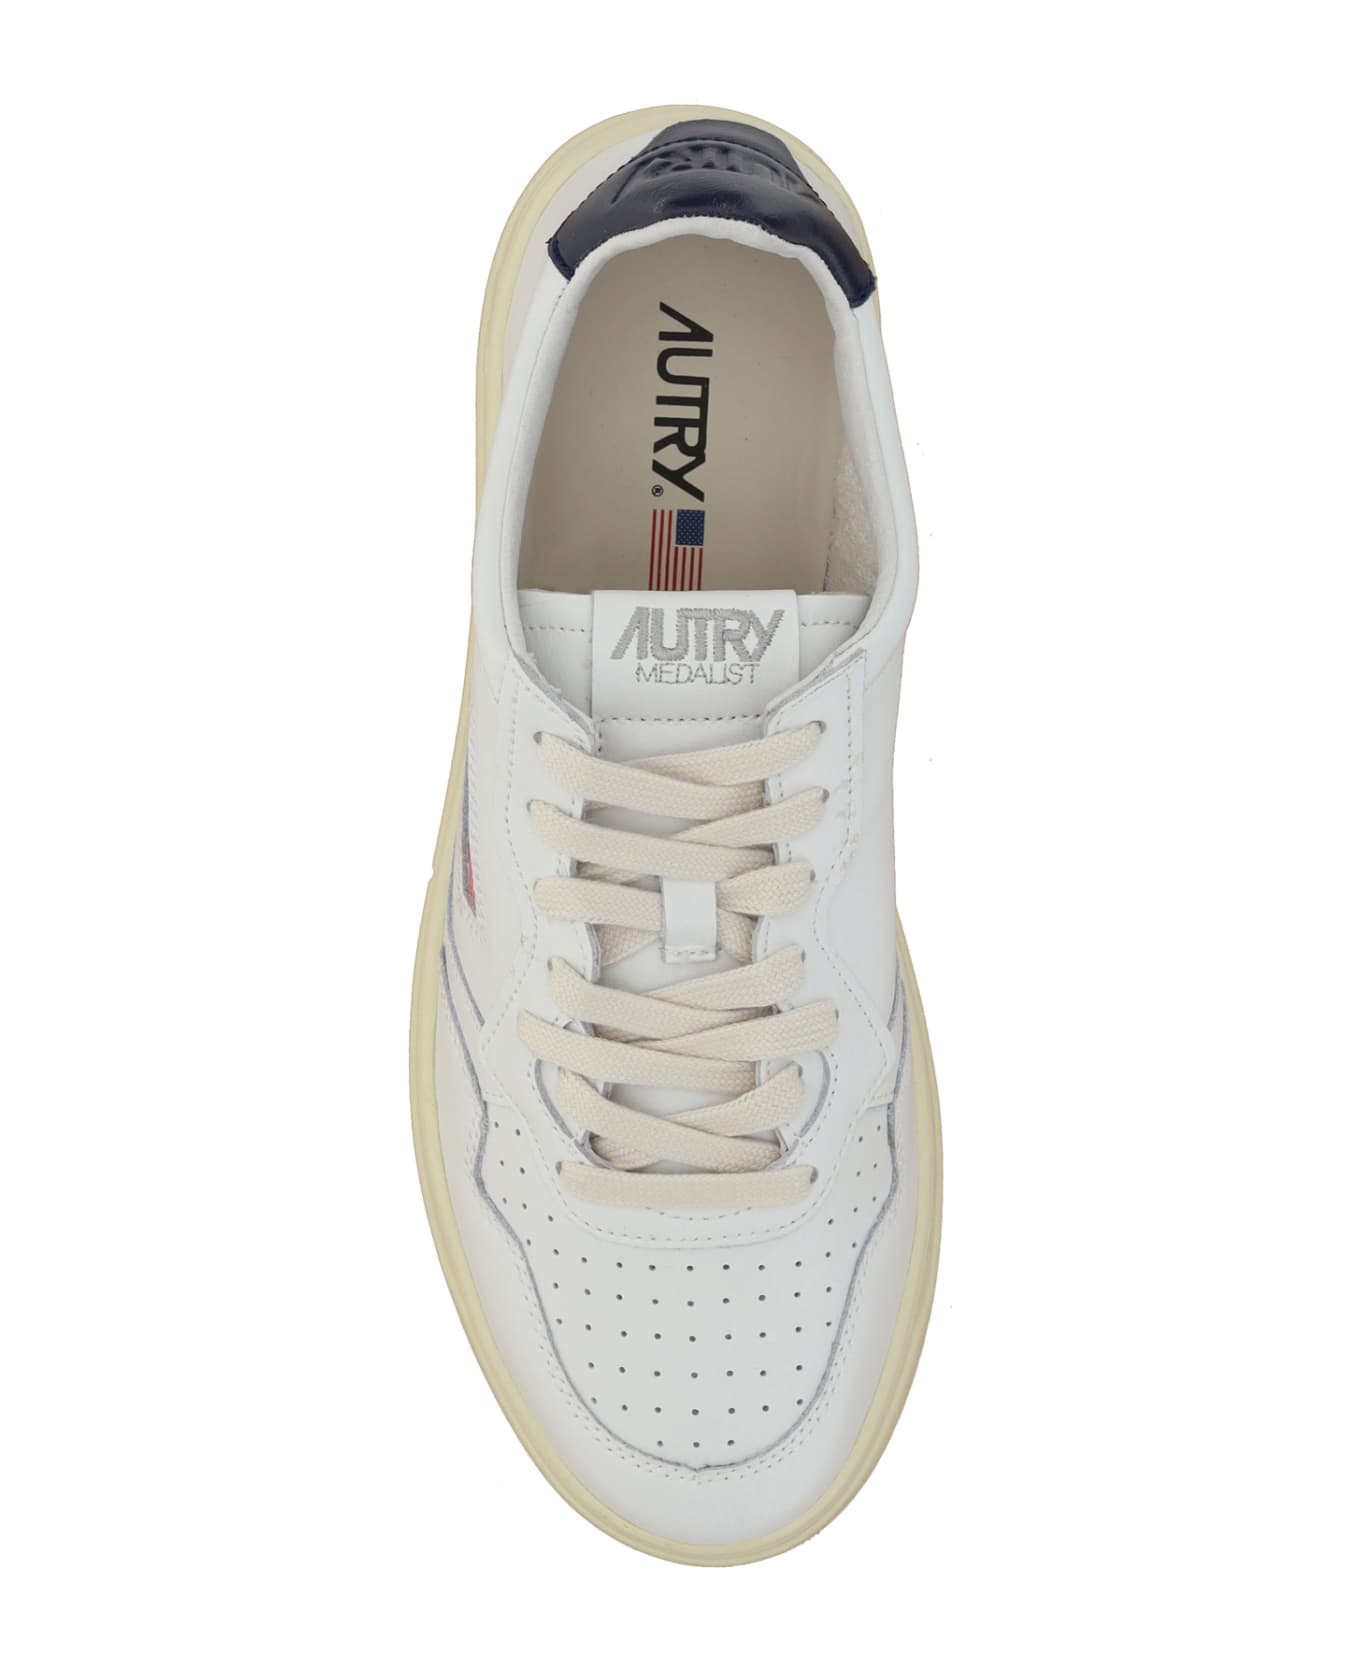 Autry 01 Low Sneakers - WHT/SPACE